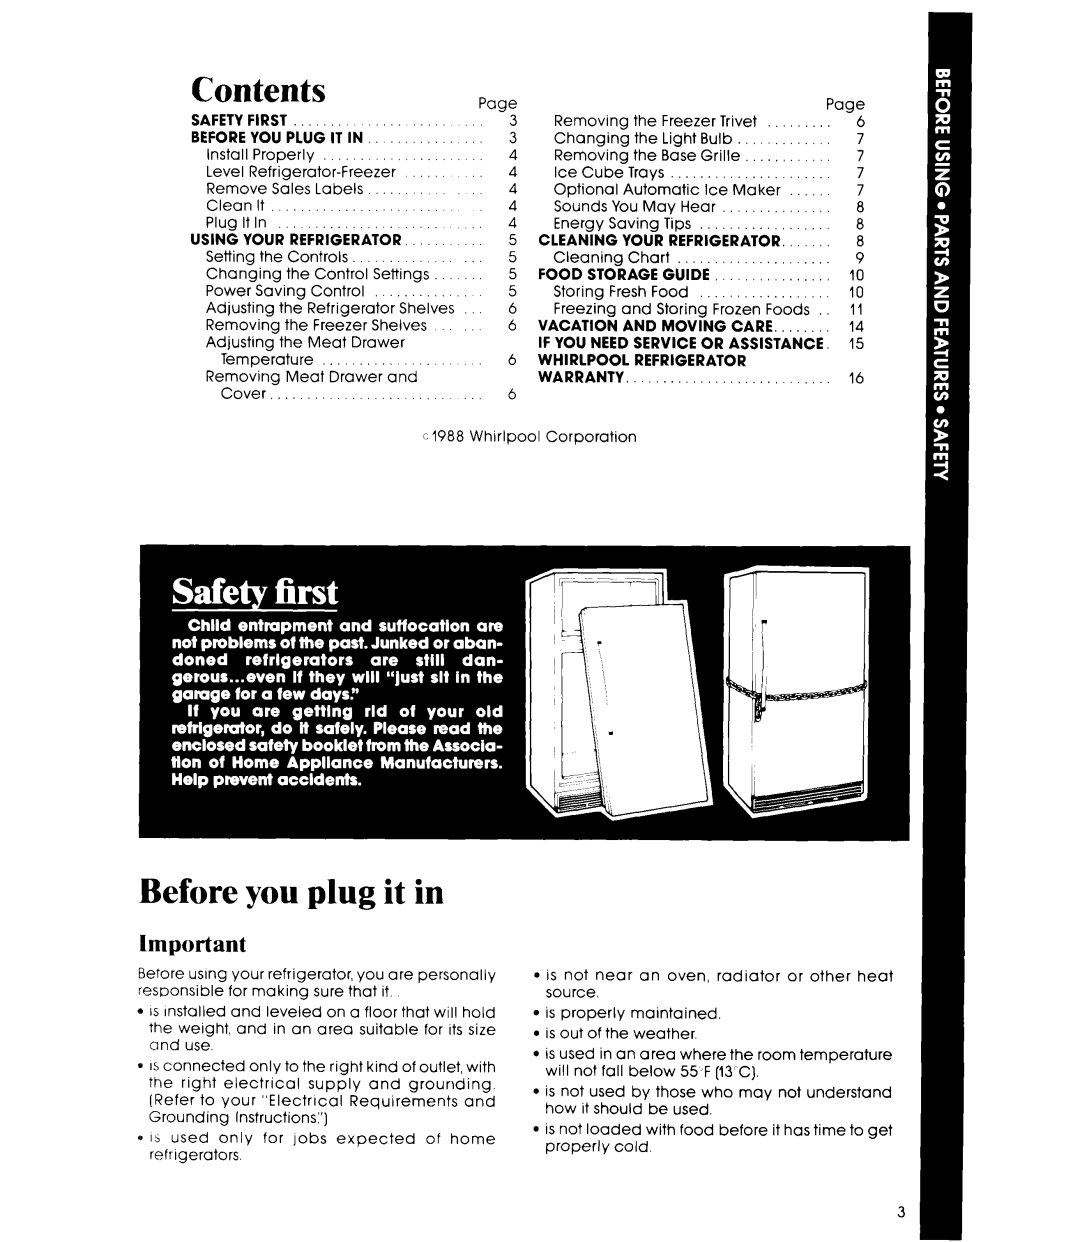 Whirlpool EDI9SK manual Contents, Before you plug it in 